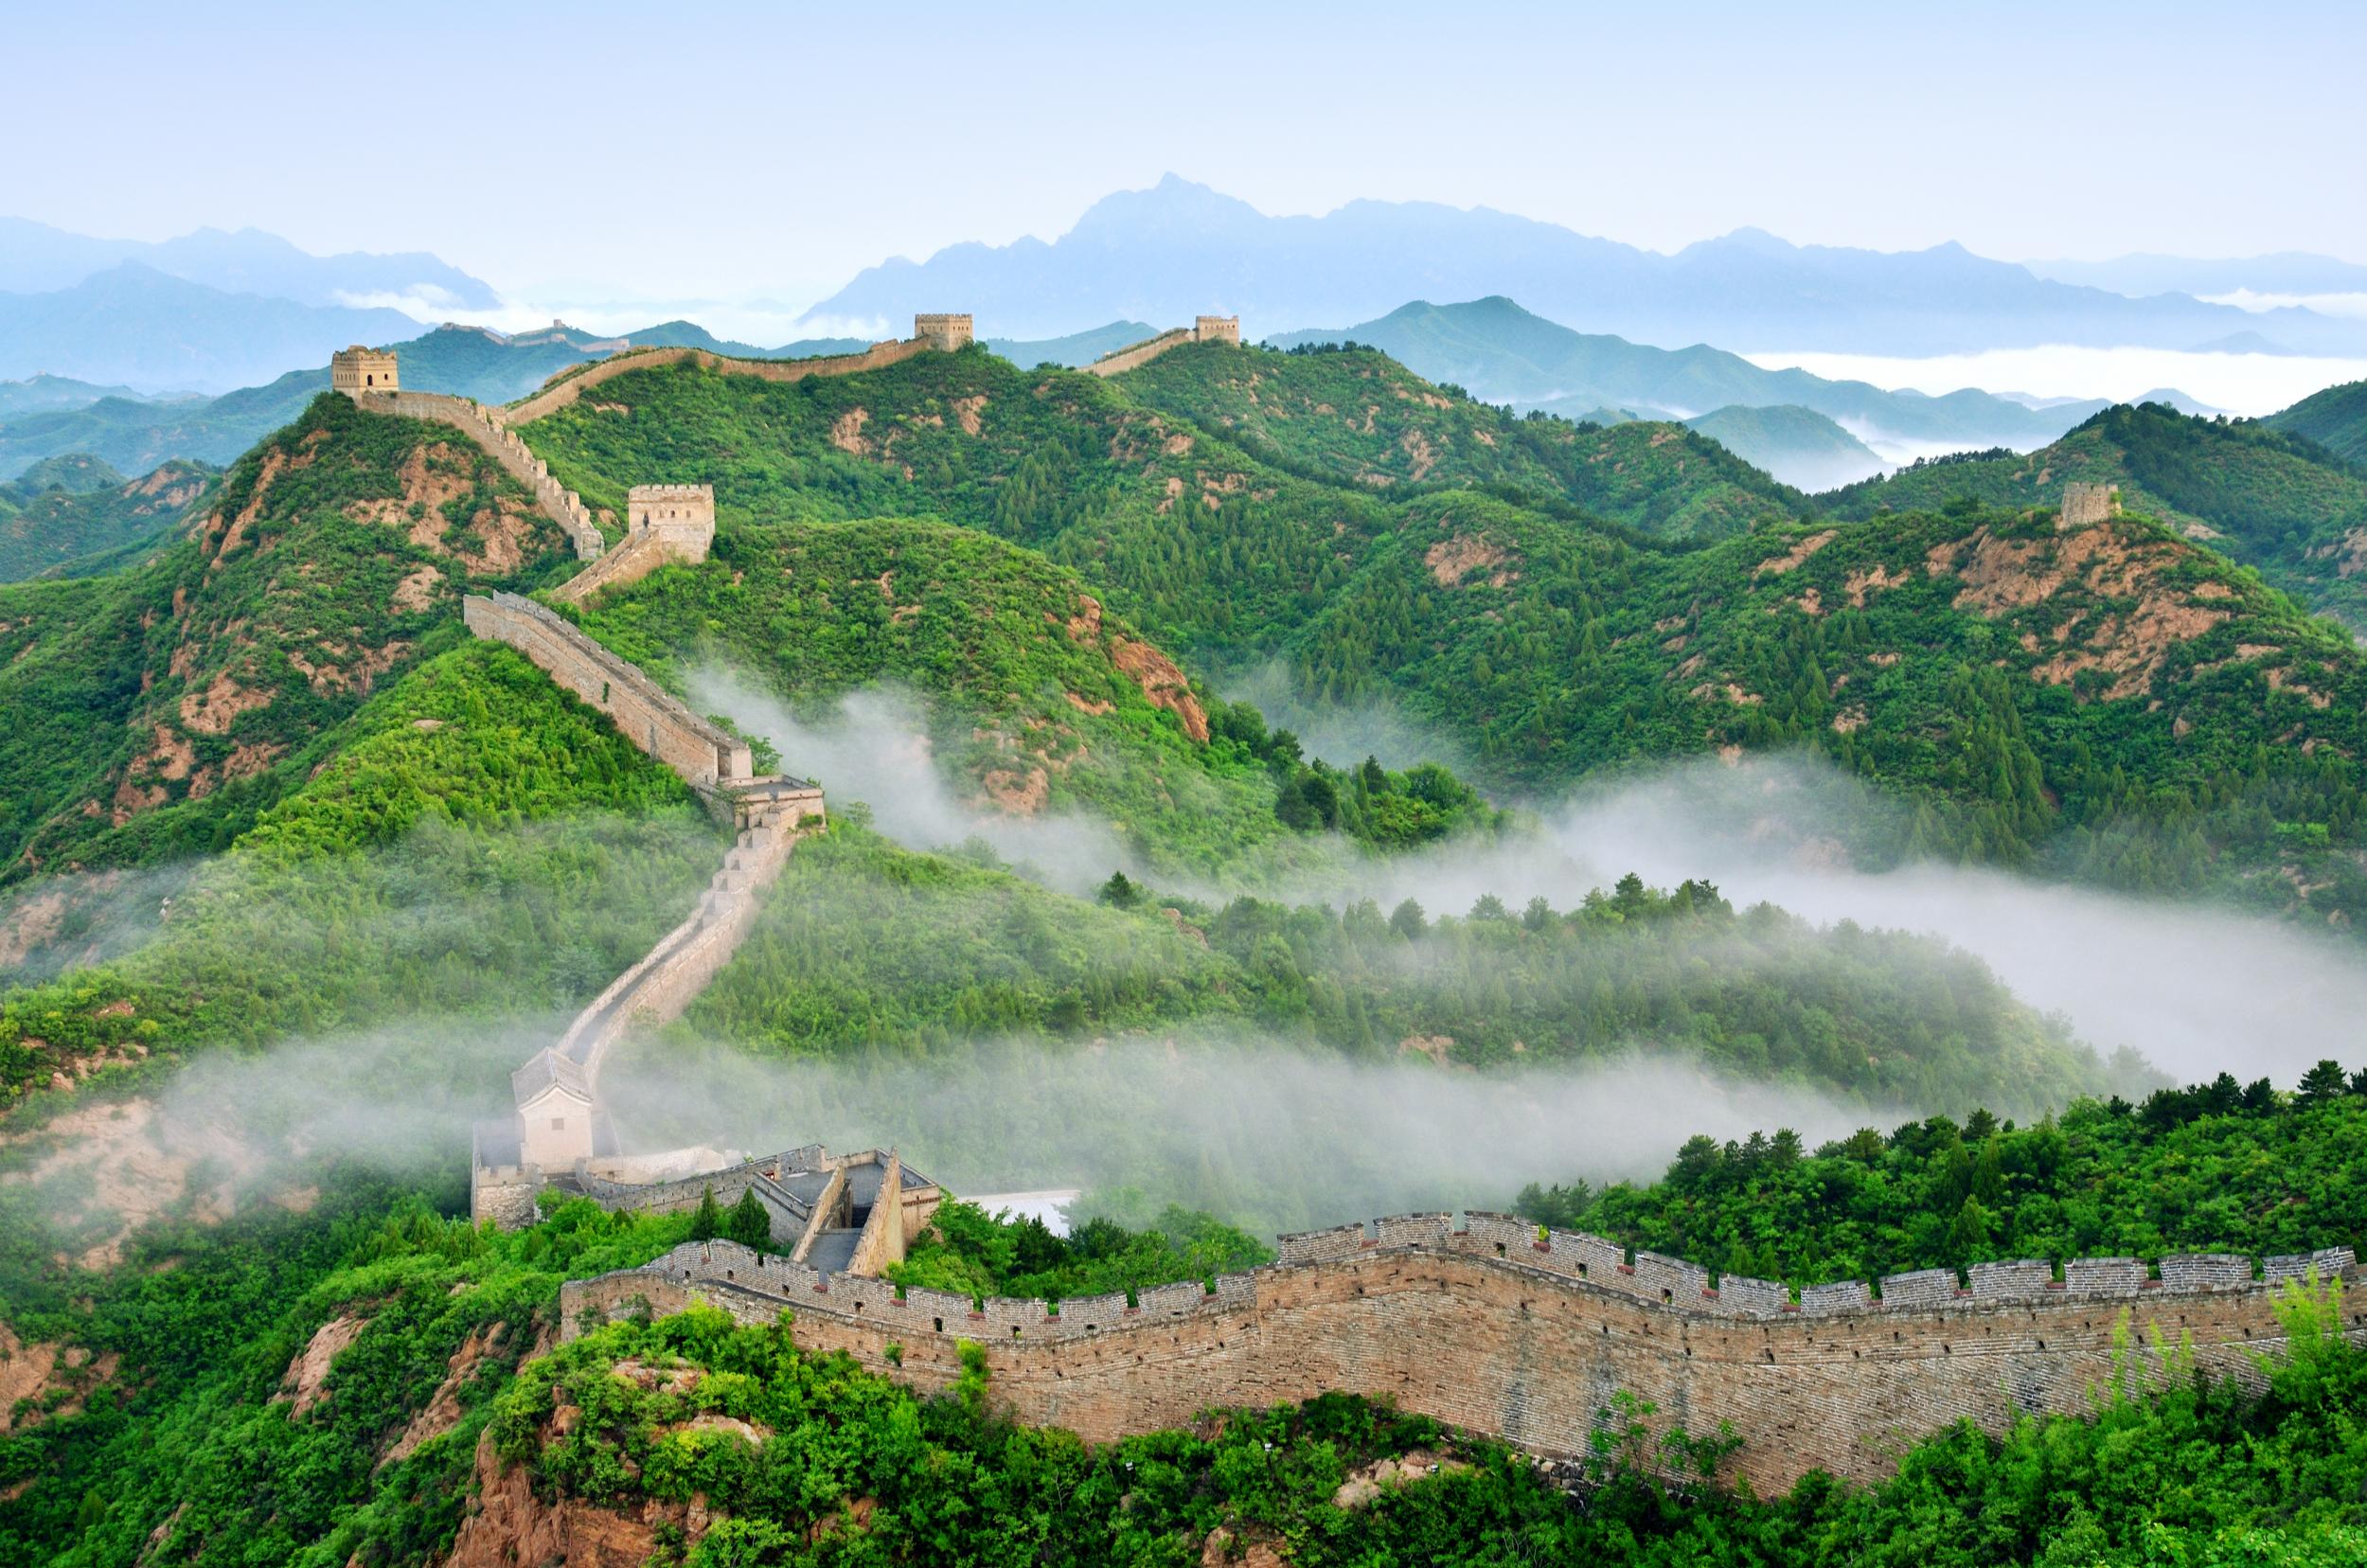 A night under the stars on China's Great Wall? Sign me up